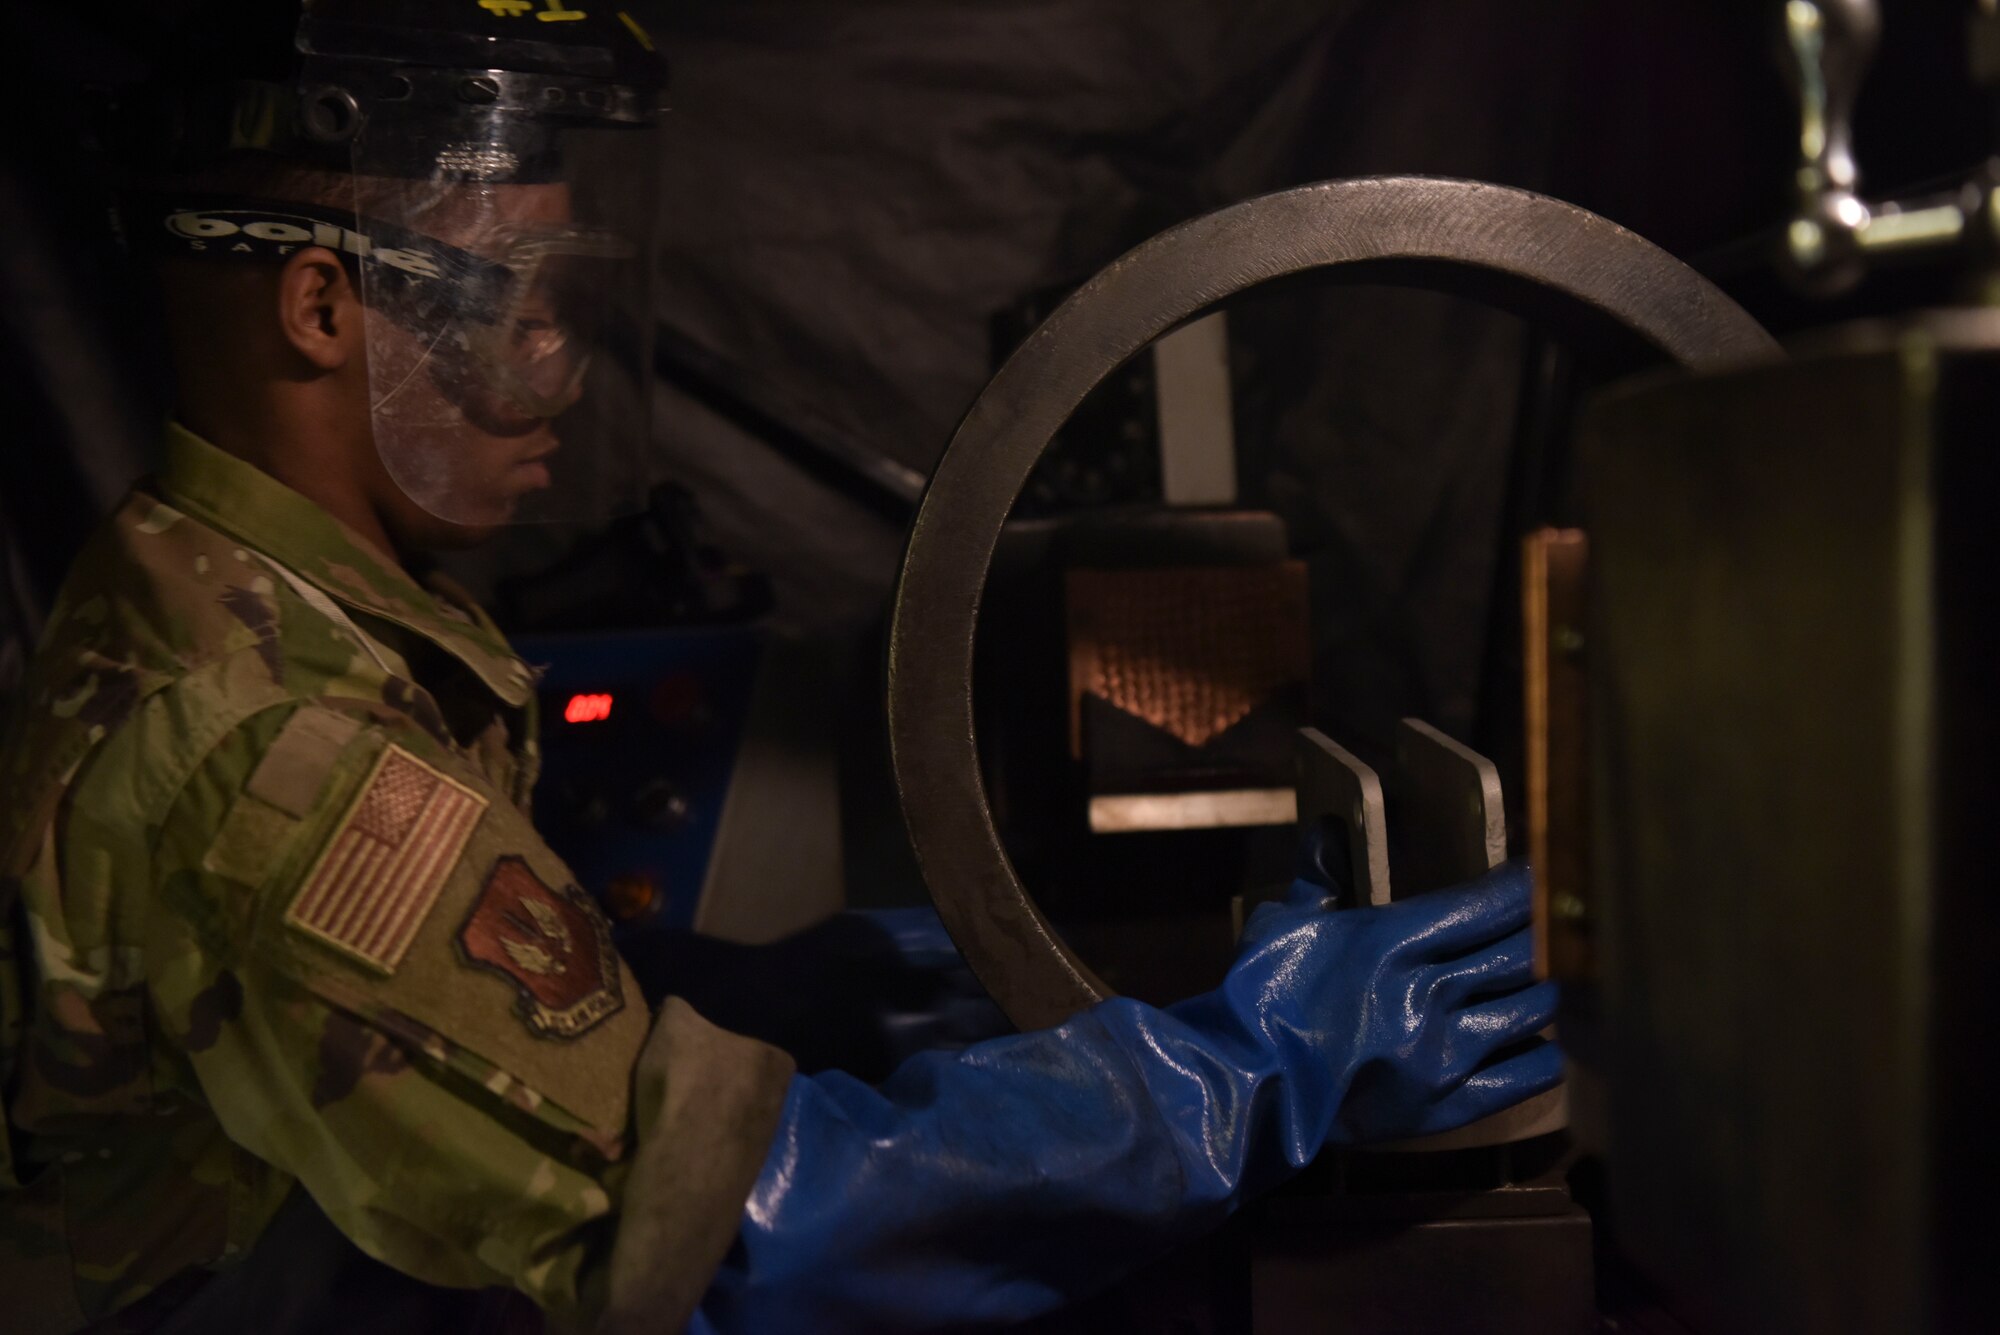 U.S. Air Force Airman 1st Class Clarence Bennett, 100th Maintenance Squadron non-destructive inspection apprentice, performs a magnetic particle inspection on a sample part, at RAF Mildenhall, England, Feb. 7, 2019. Magnetic particle inspections identify stress fatigue fractures on a high variety of parts, varying from bolts, tow bars and other supporting aerospace ground equipment. (U.S. Air Force photo by Airman 1st Class Alexandria Lee)